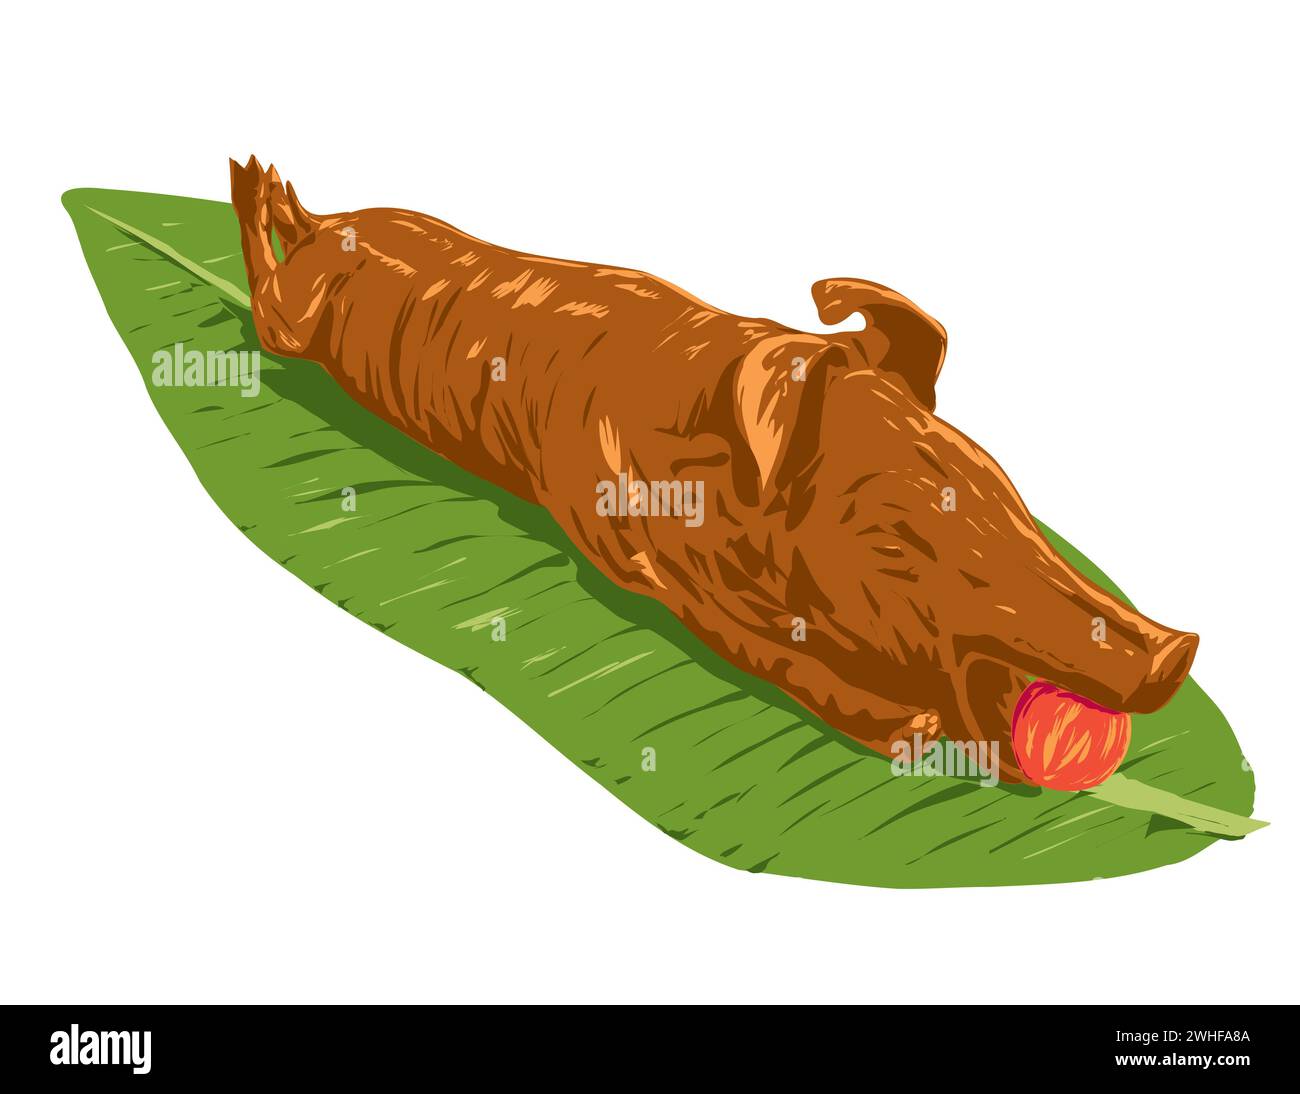 Art Deco or WPA poster art of a lechon, litson  or roasted suckling pig with apple on banana leaf done in works project administration style. Stock Photo